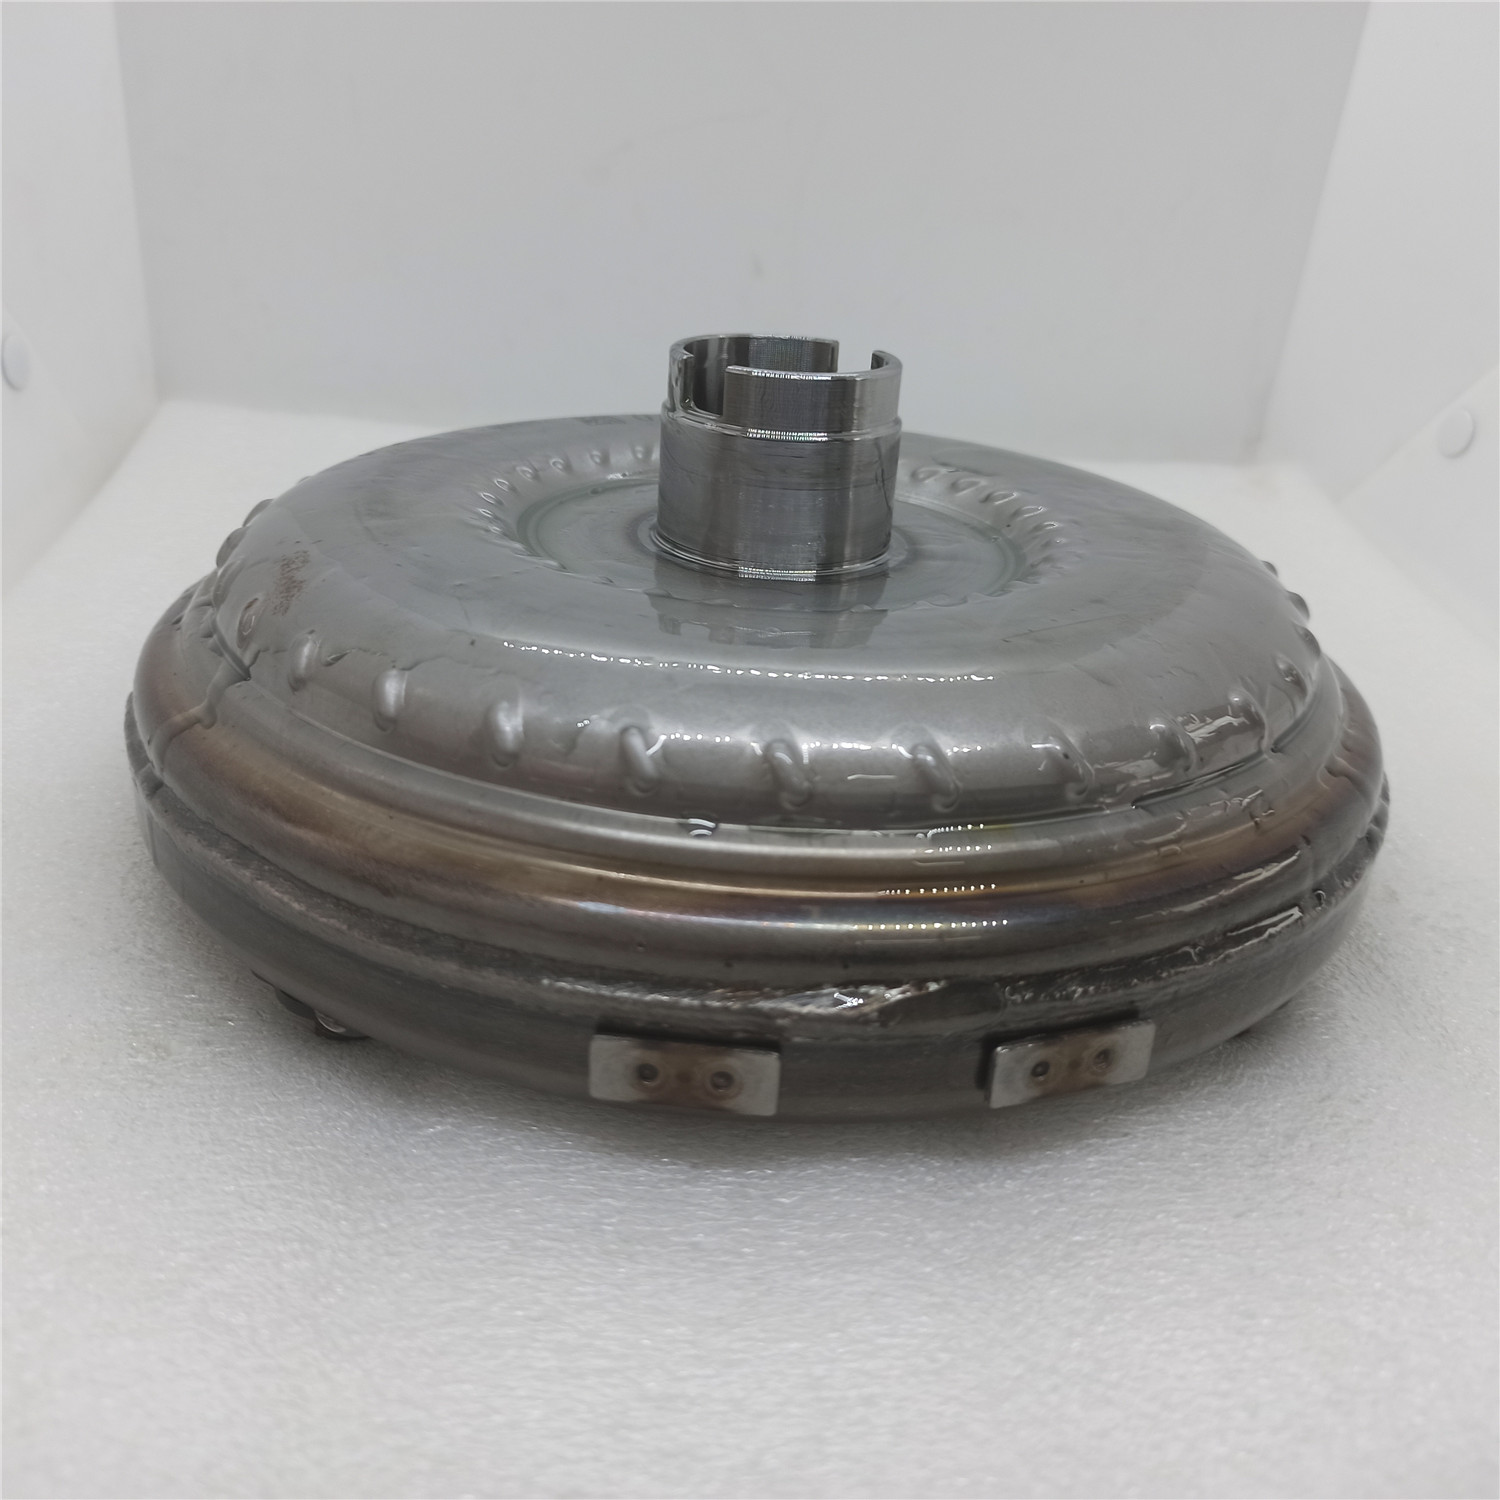 JF015E-0029-FN JATCO RE0F11A JF015E CVT Transmission Torque Converter 07D from new trans fit for /Nissan